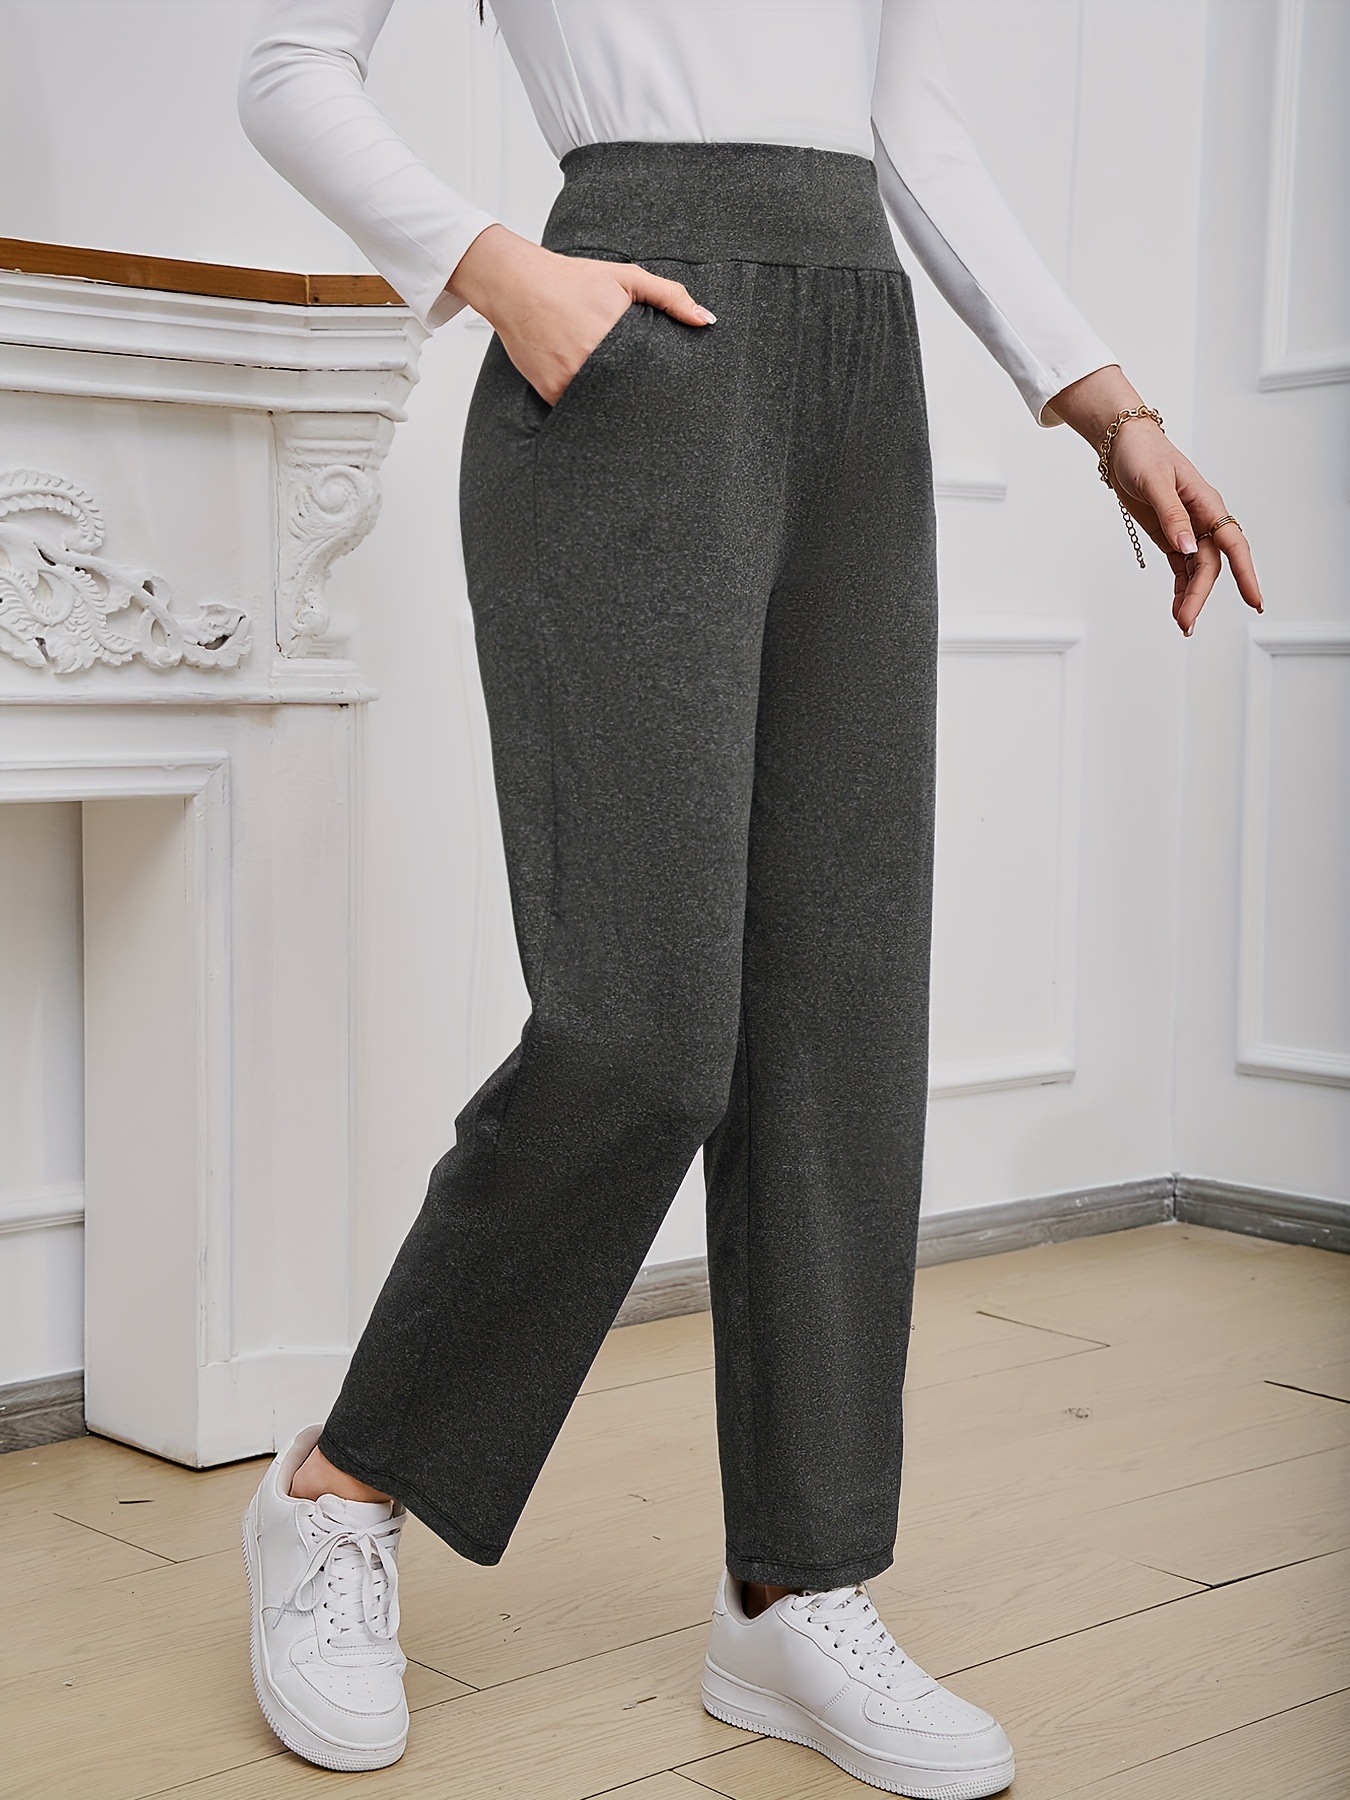 High Waist Pants Casual Outfit